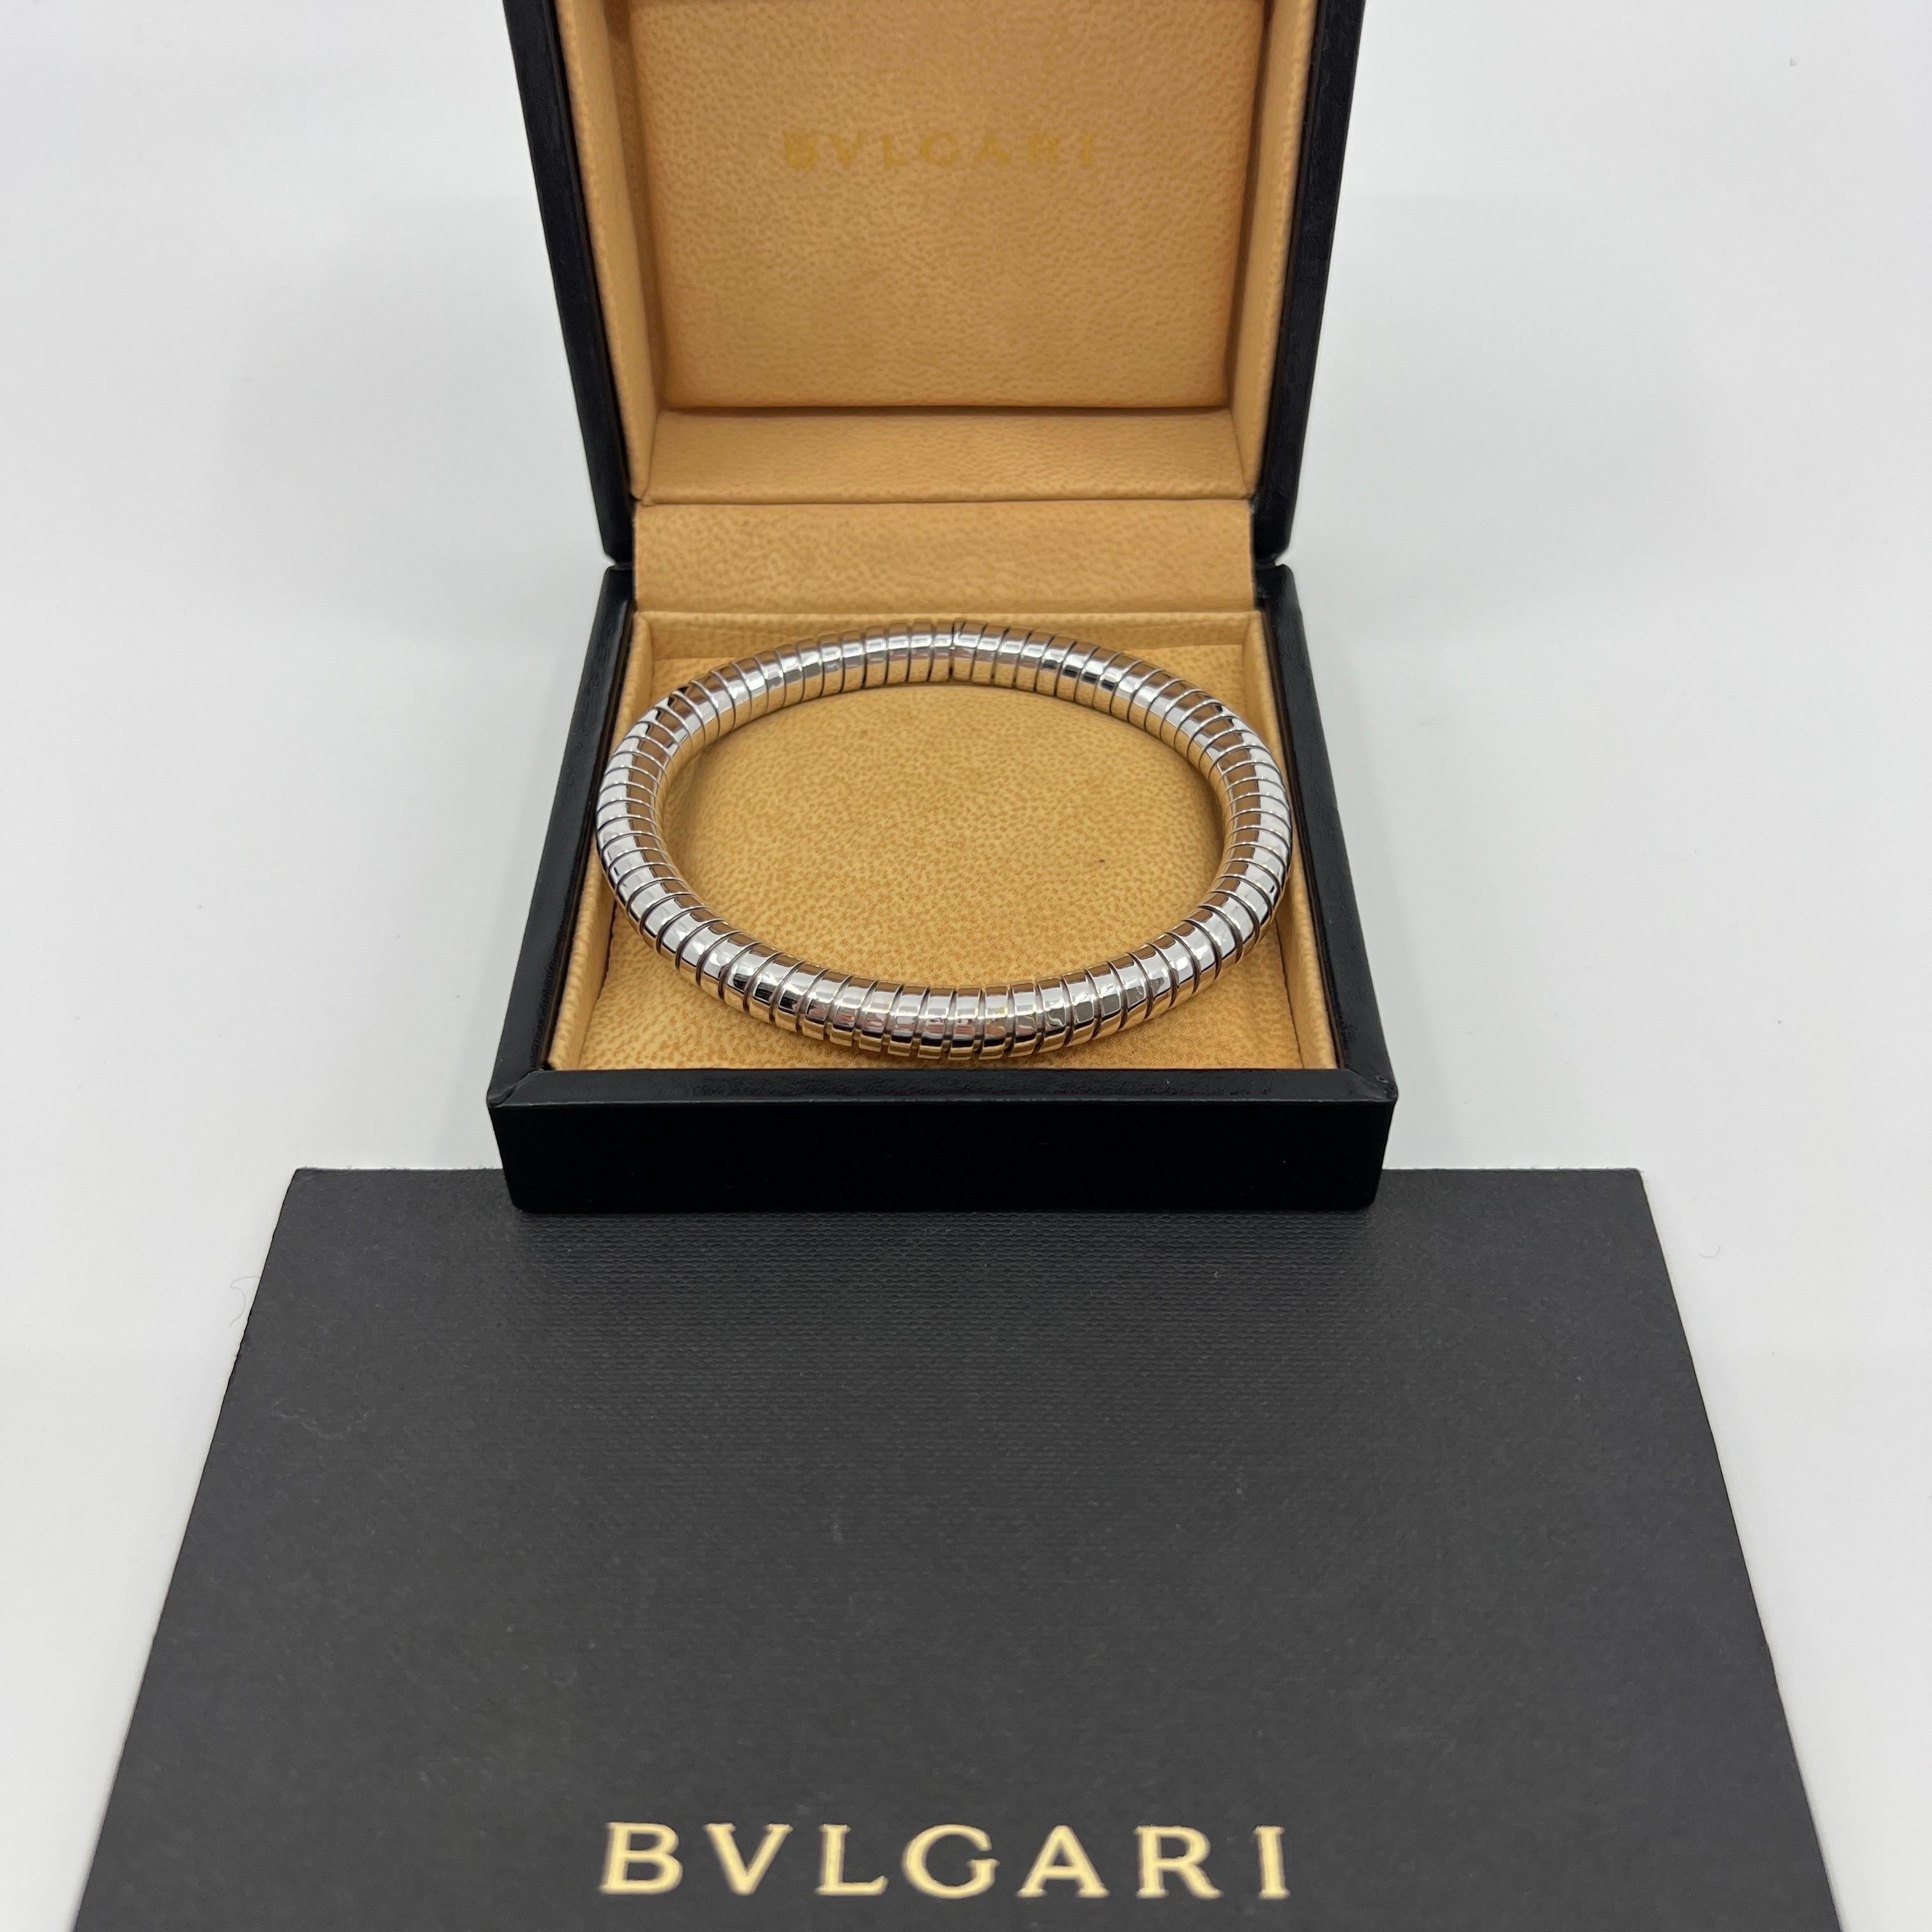 Bulgari BVLGARI Serpenti Jewelry Rose Gold 26mm Quartz 102368... for  $54,000 for sale from a Seller on Chrono24